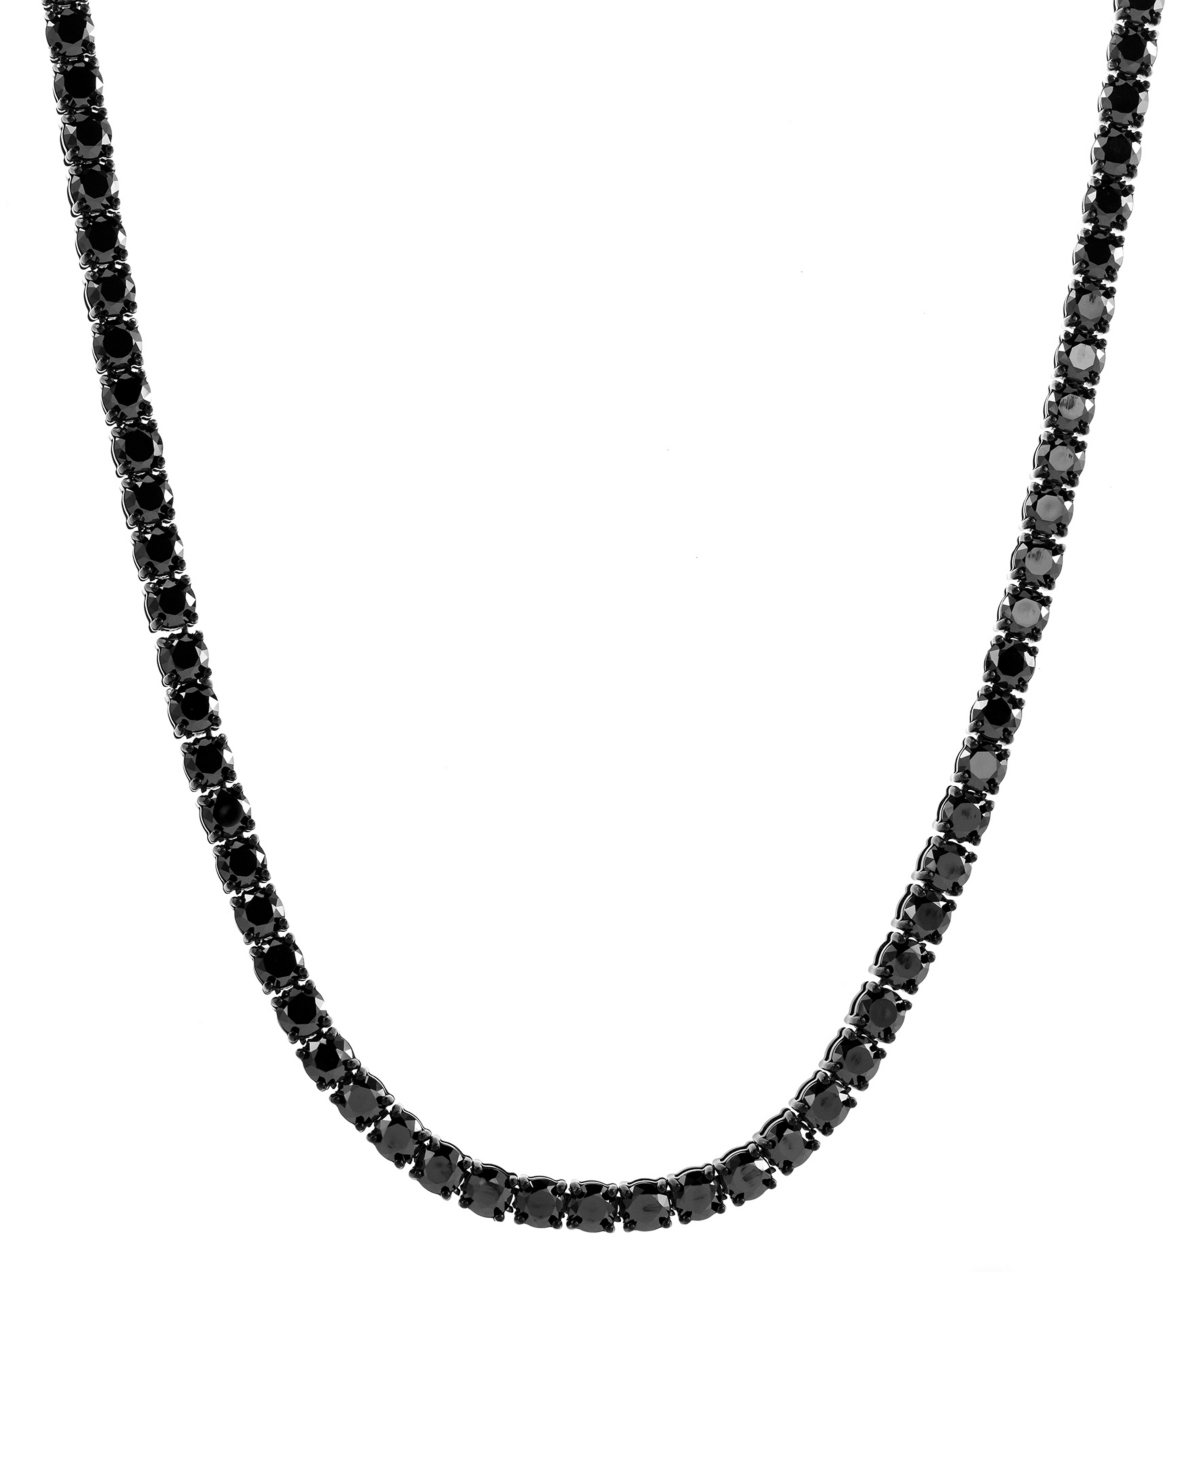 Men's Cubic Zirconia 20" Tennis Necklace in Black Ion-Plated Stainless Steel - Black